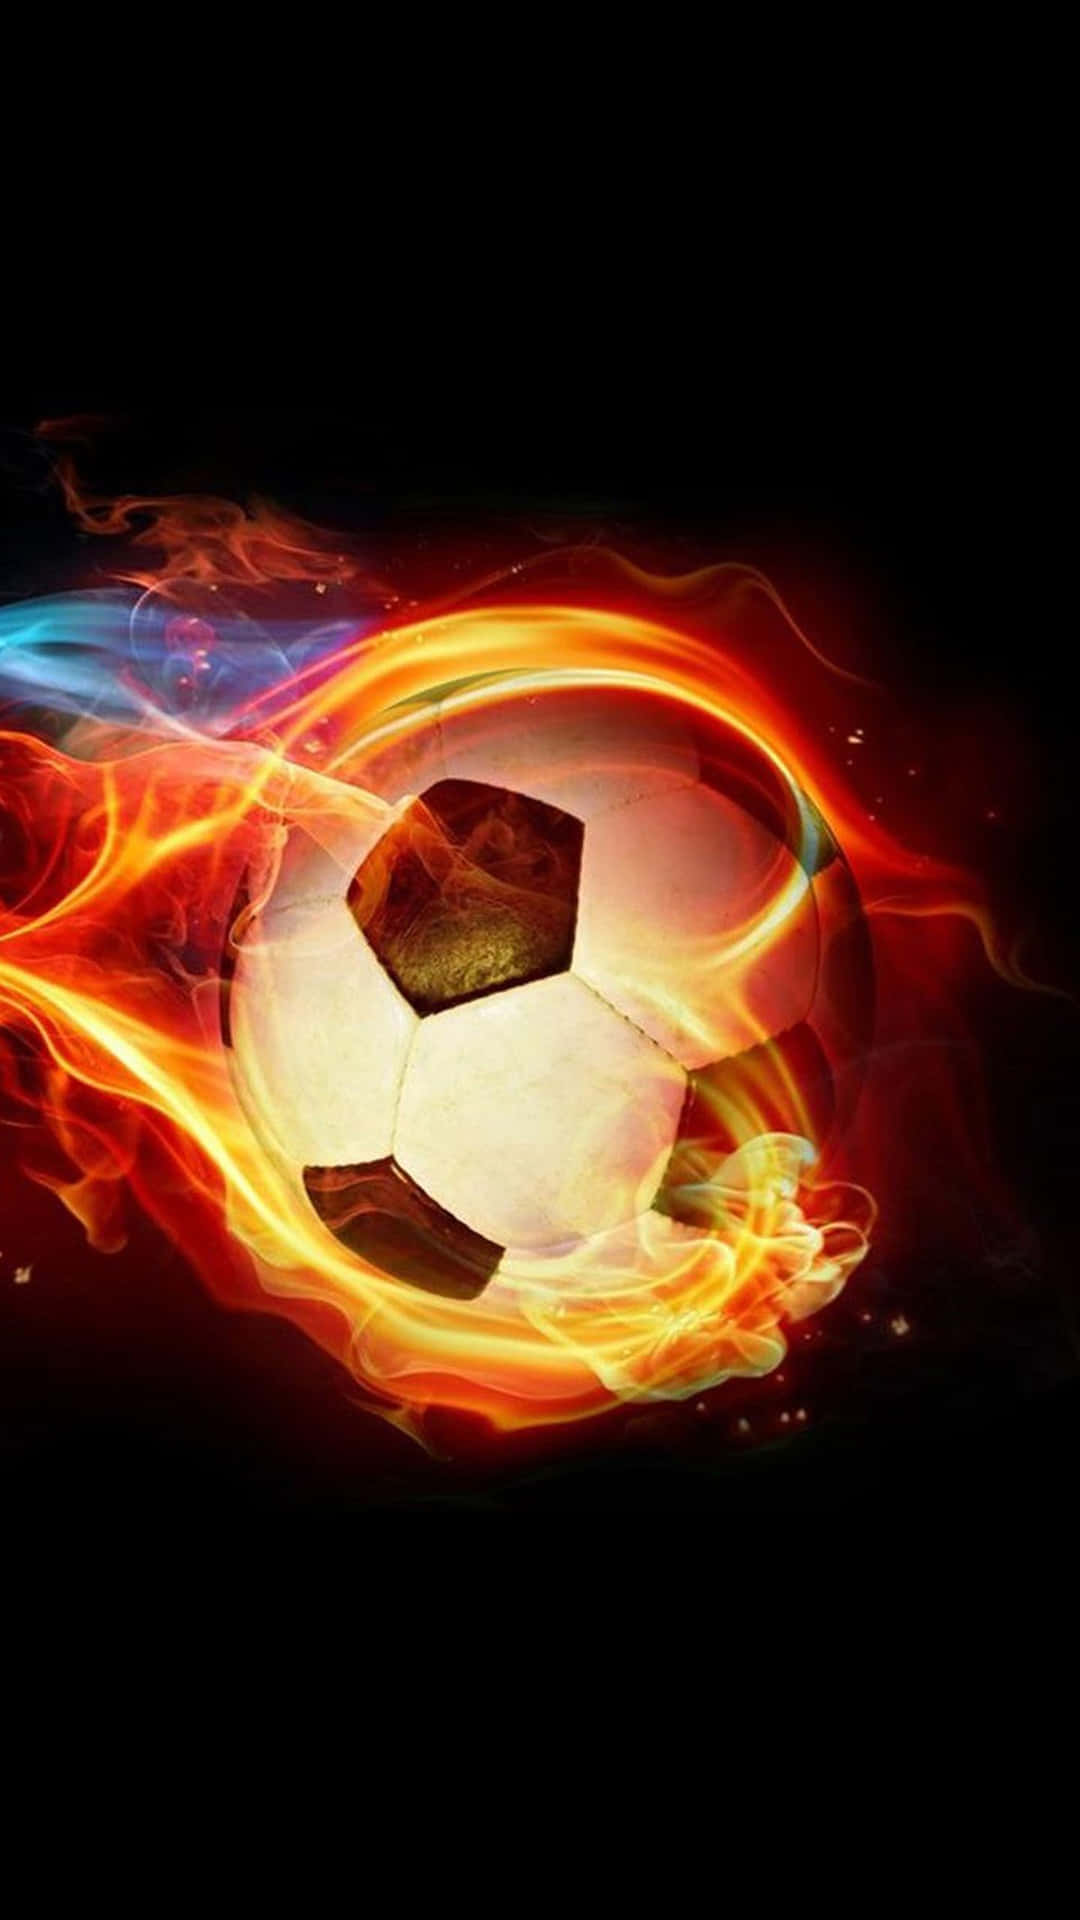 "Football is aflame with passion!" Wallpaper